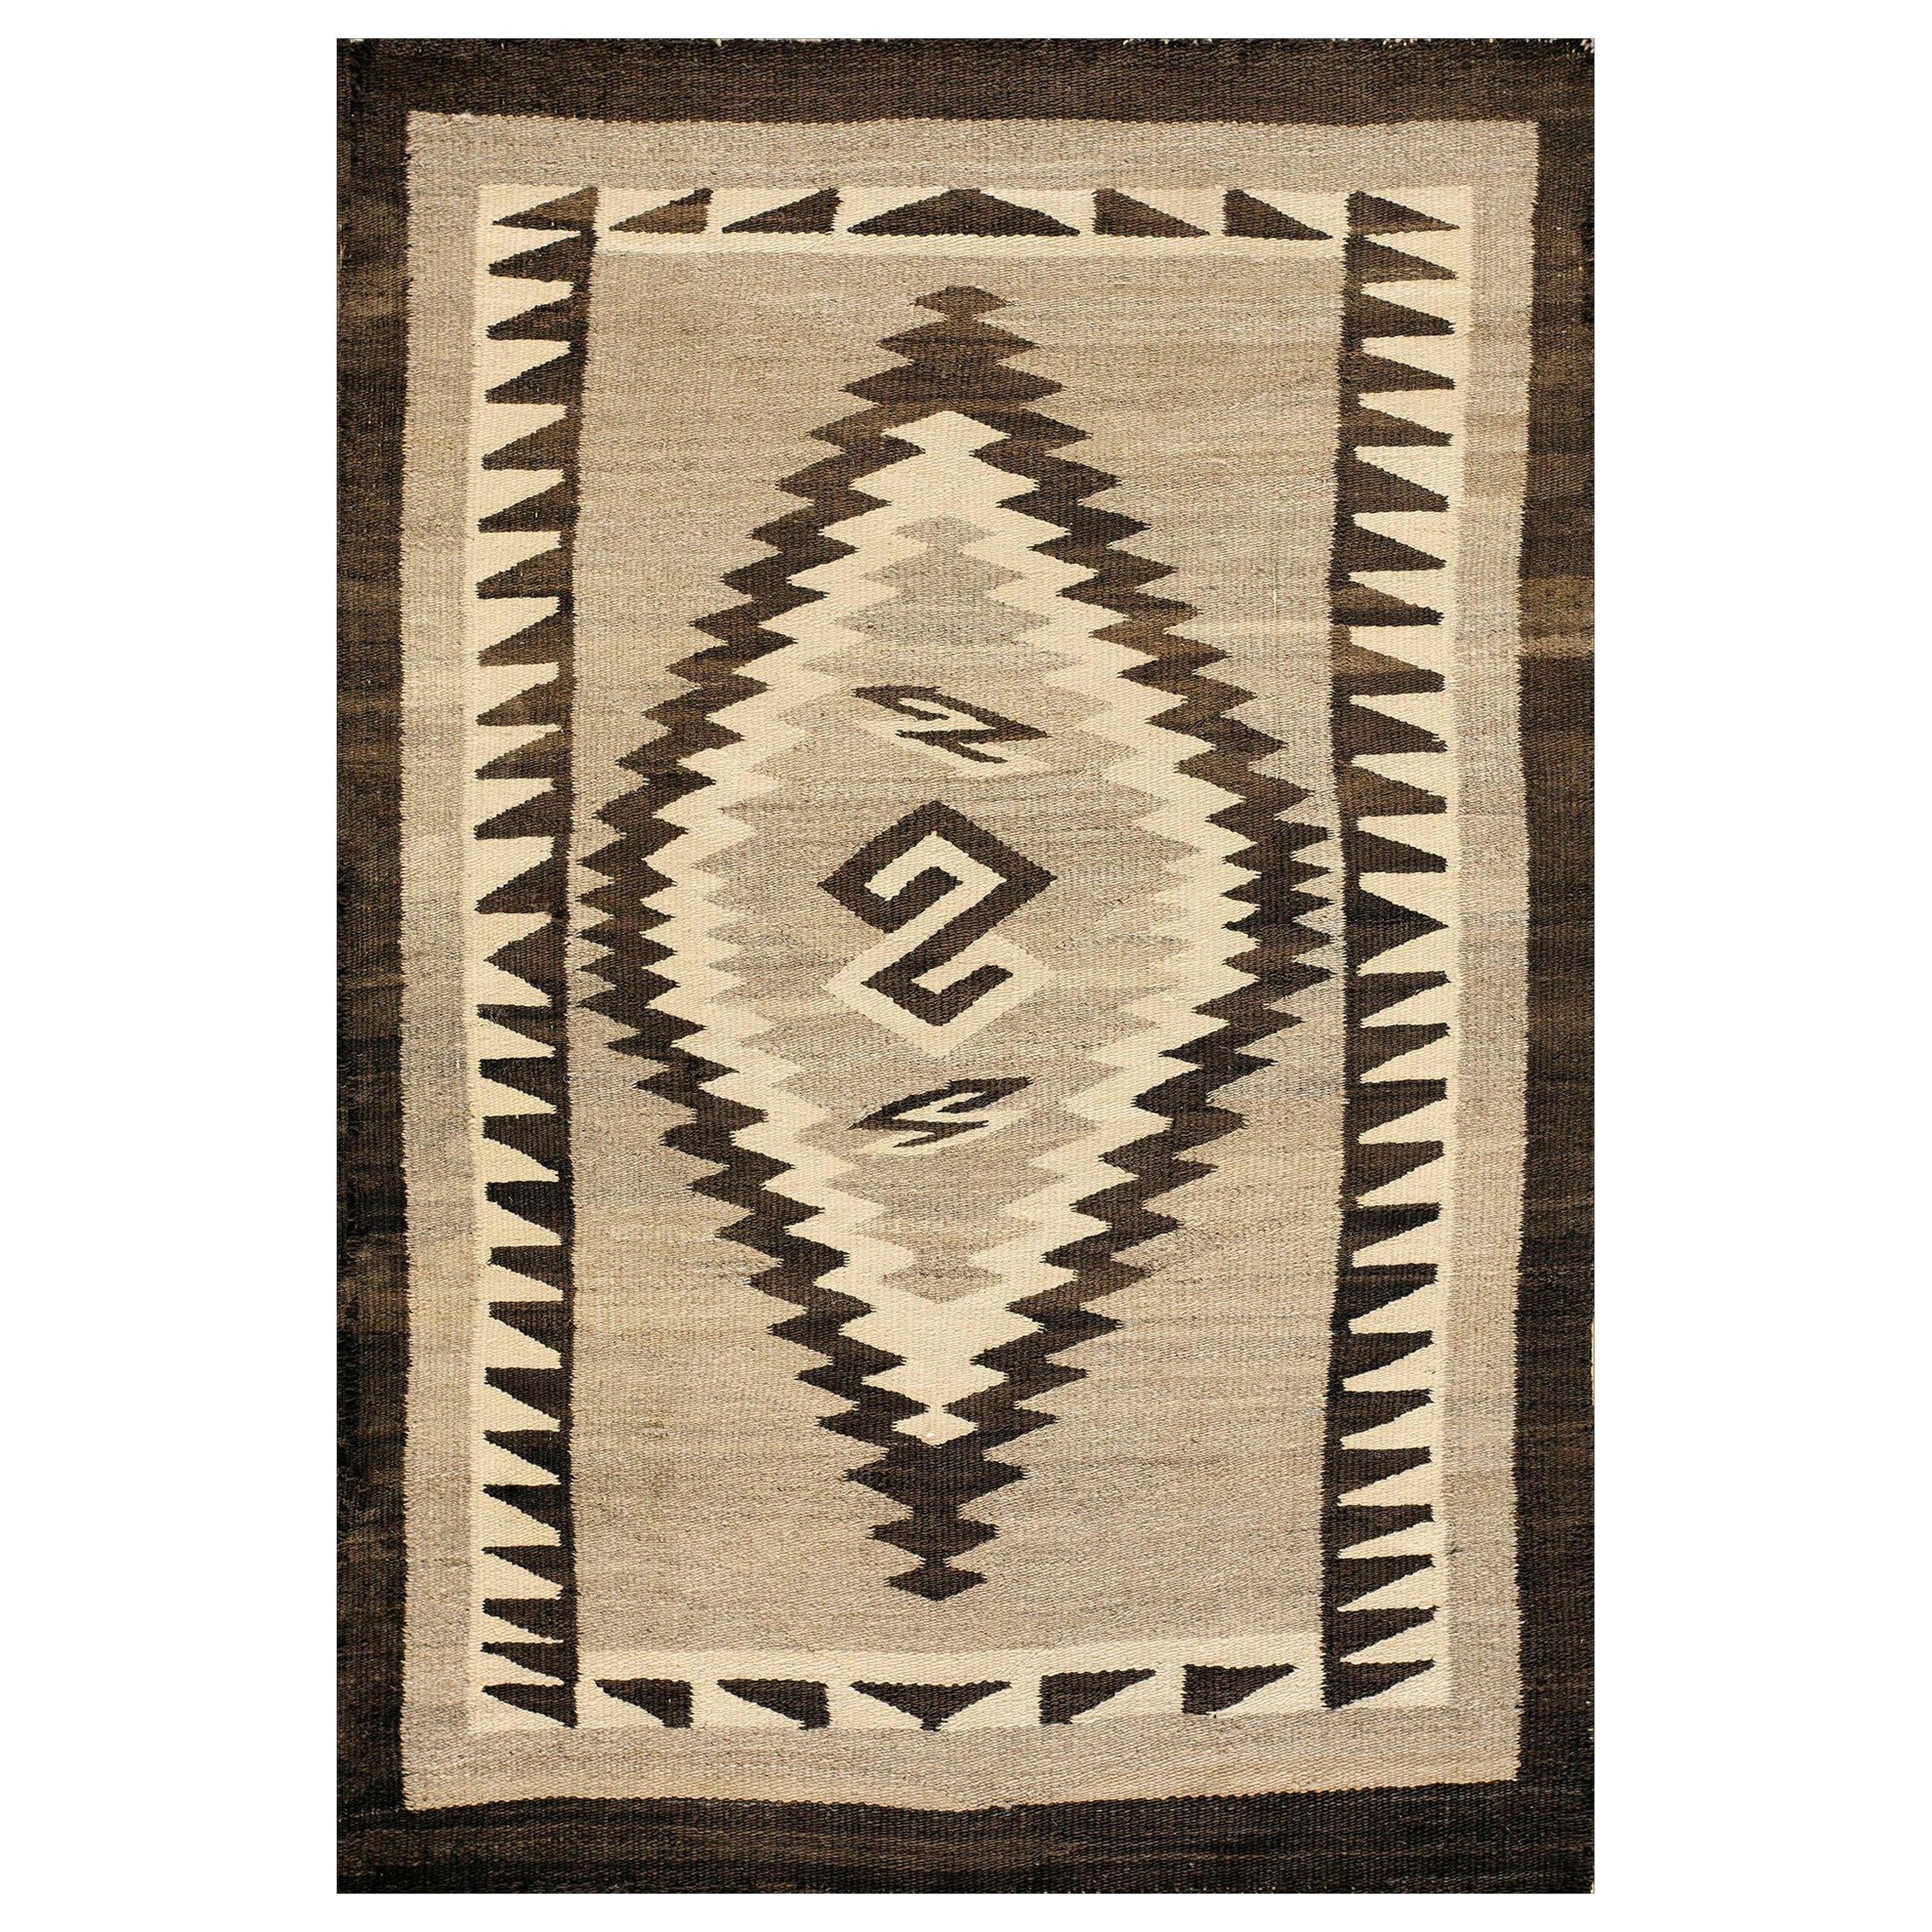 1930s American Navajo Two Grey Hills Carpet ( 2'4" x 4'3" - 72 x 130 ) For Sale